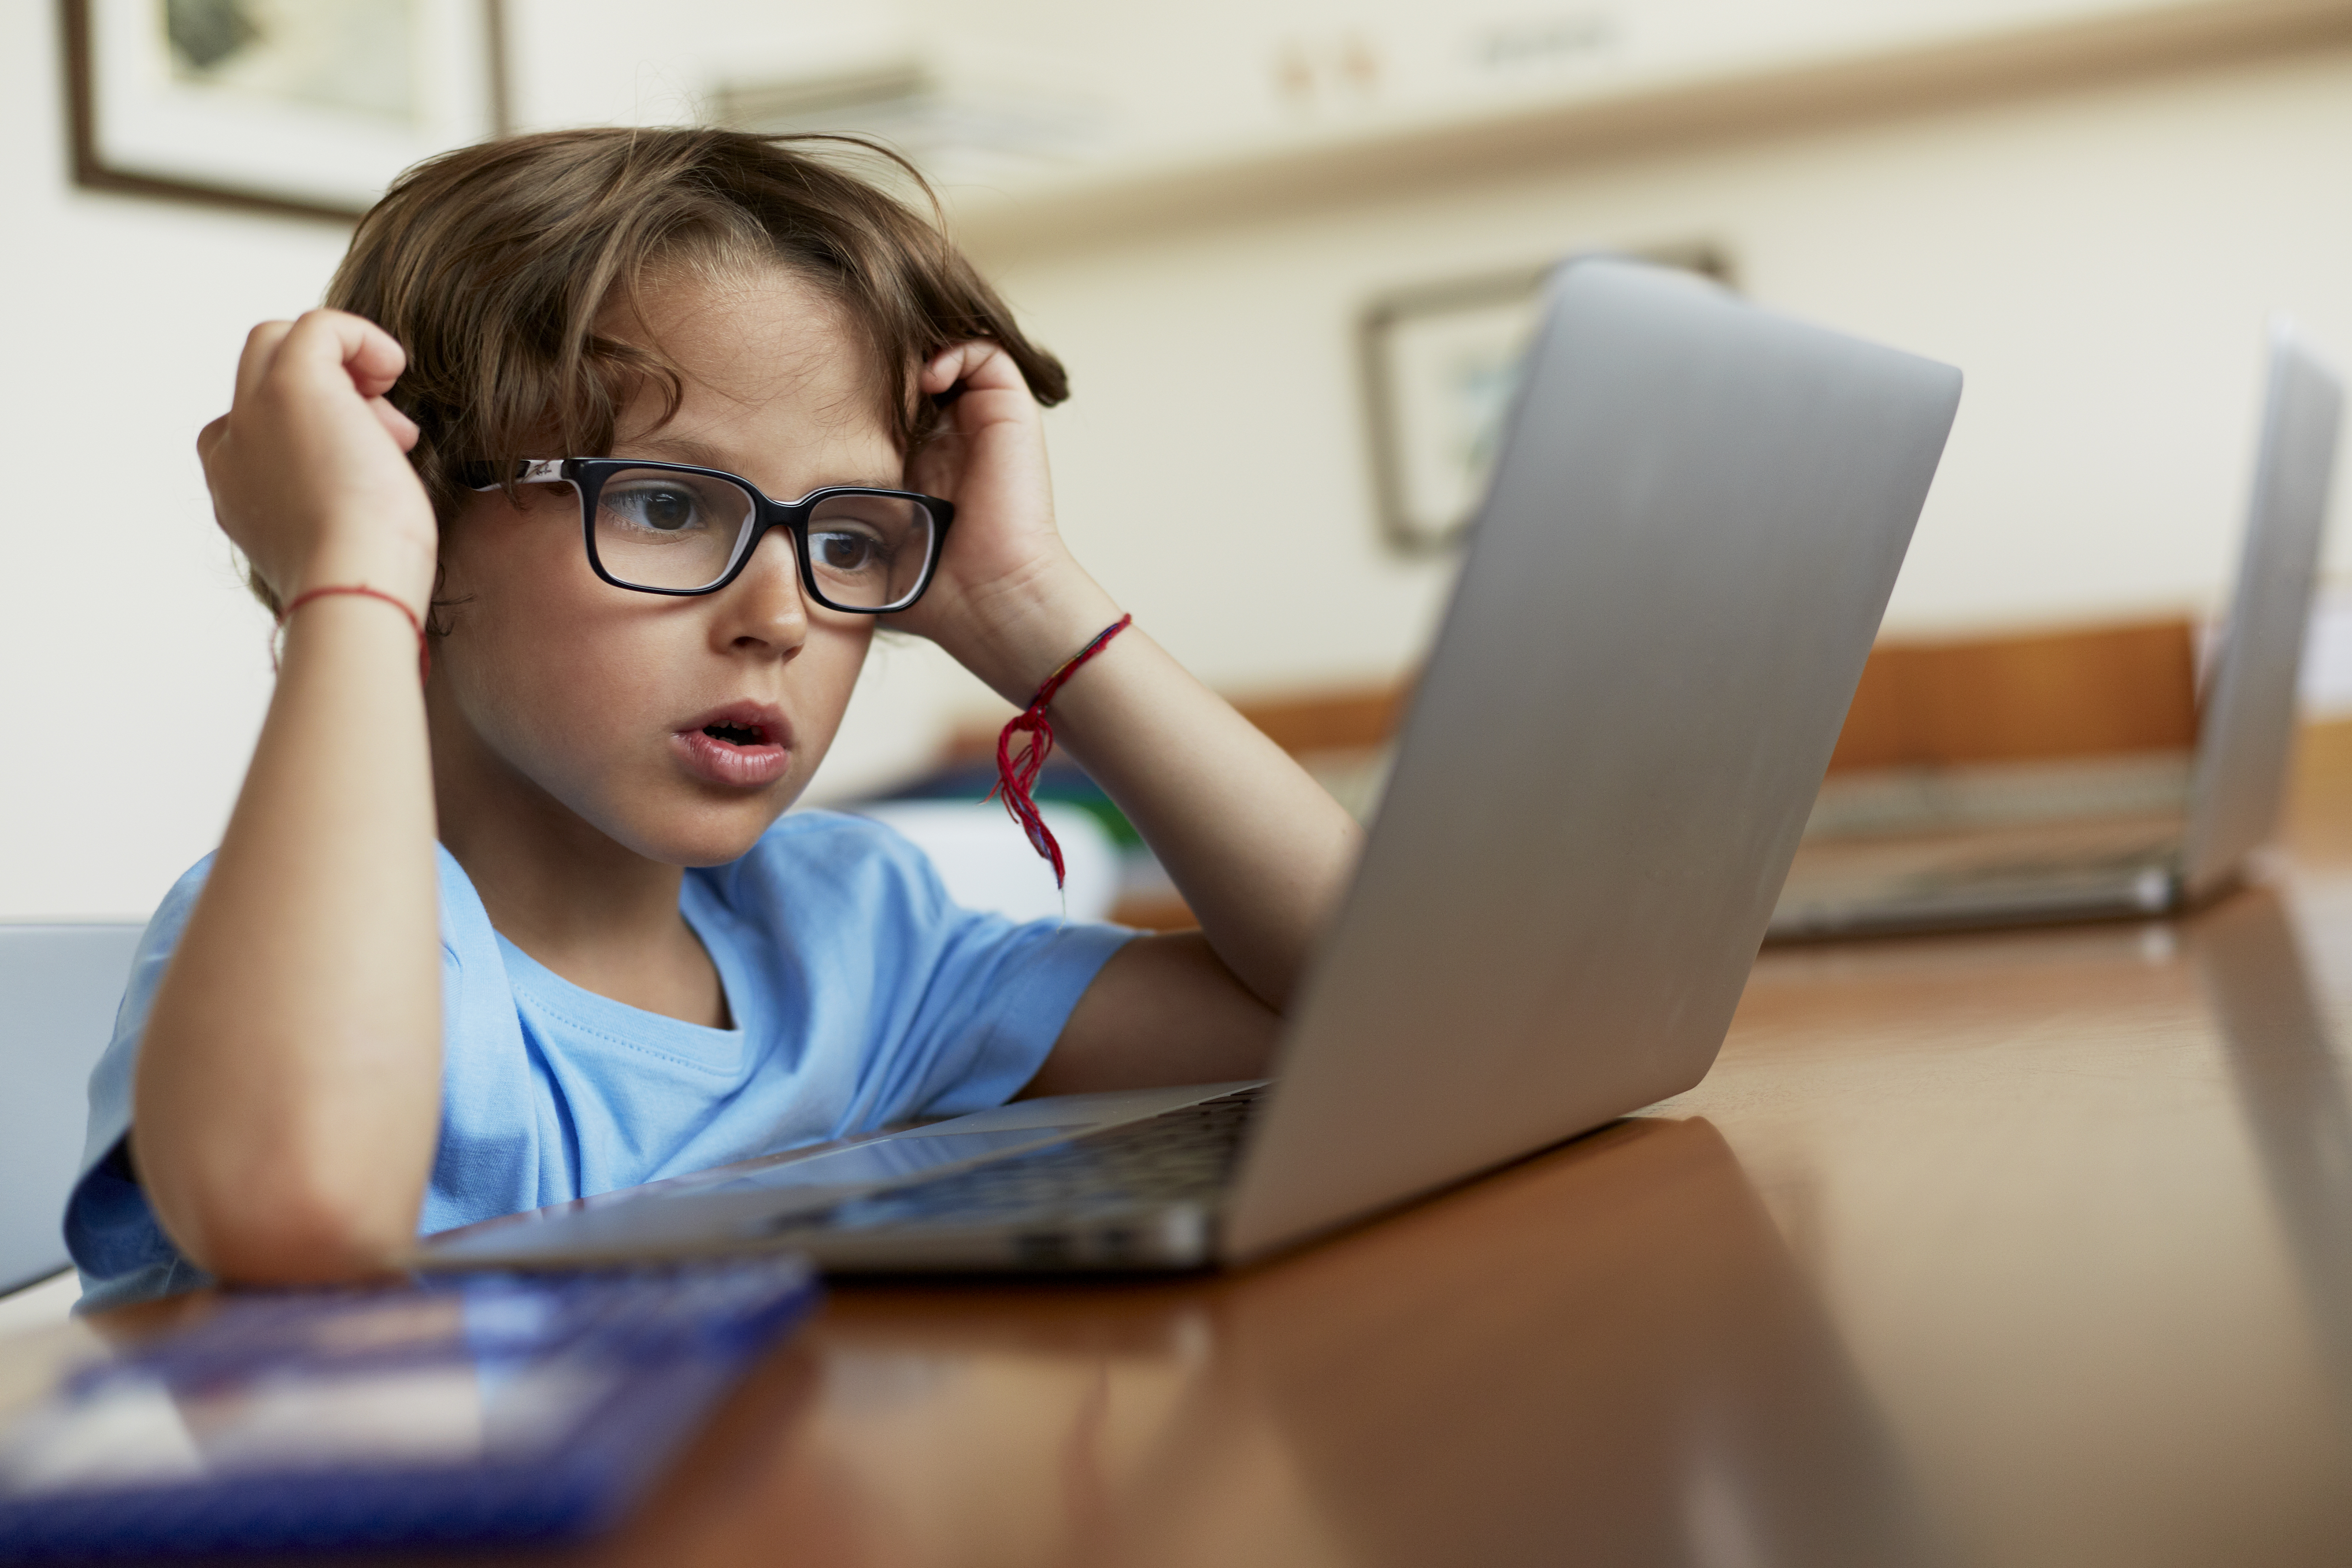 Little boy on a laptop | Source: Getty Images